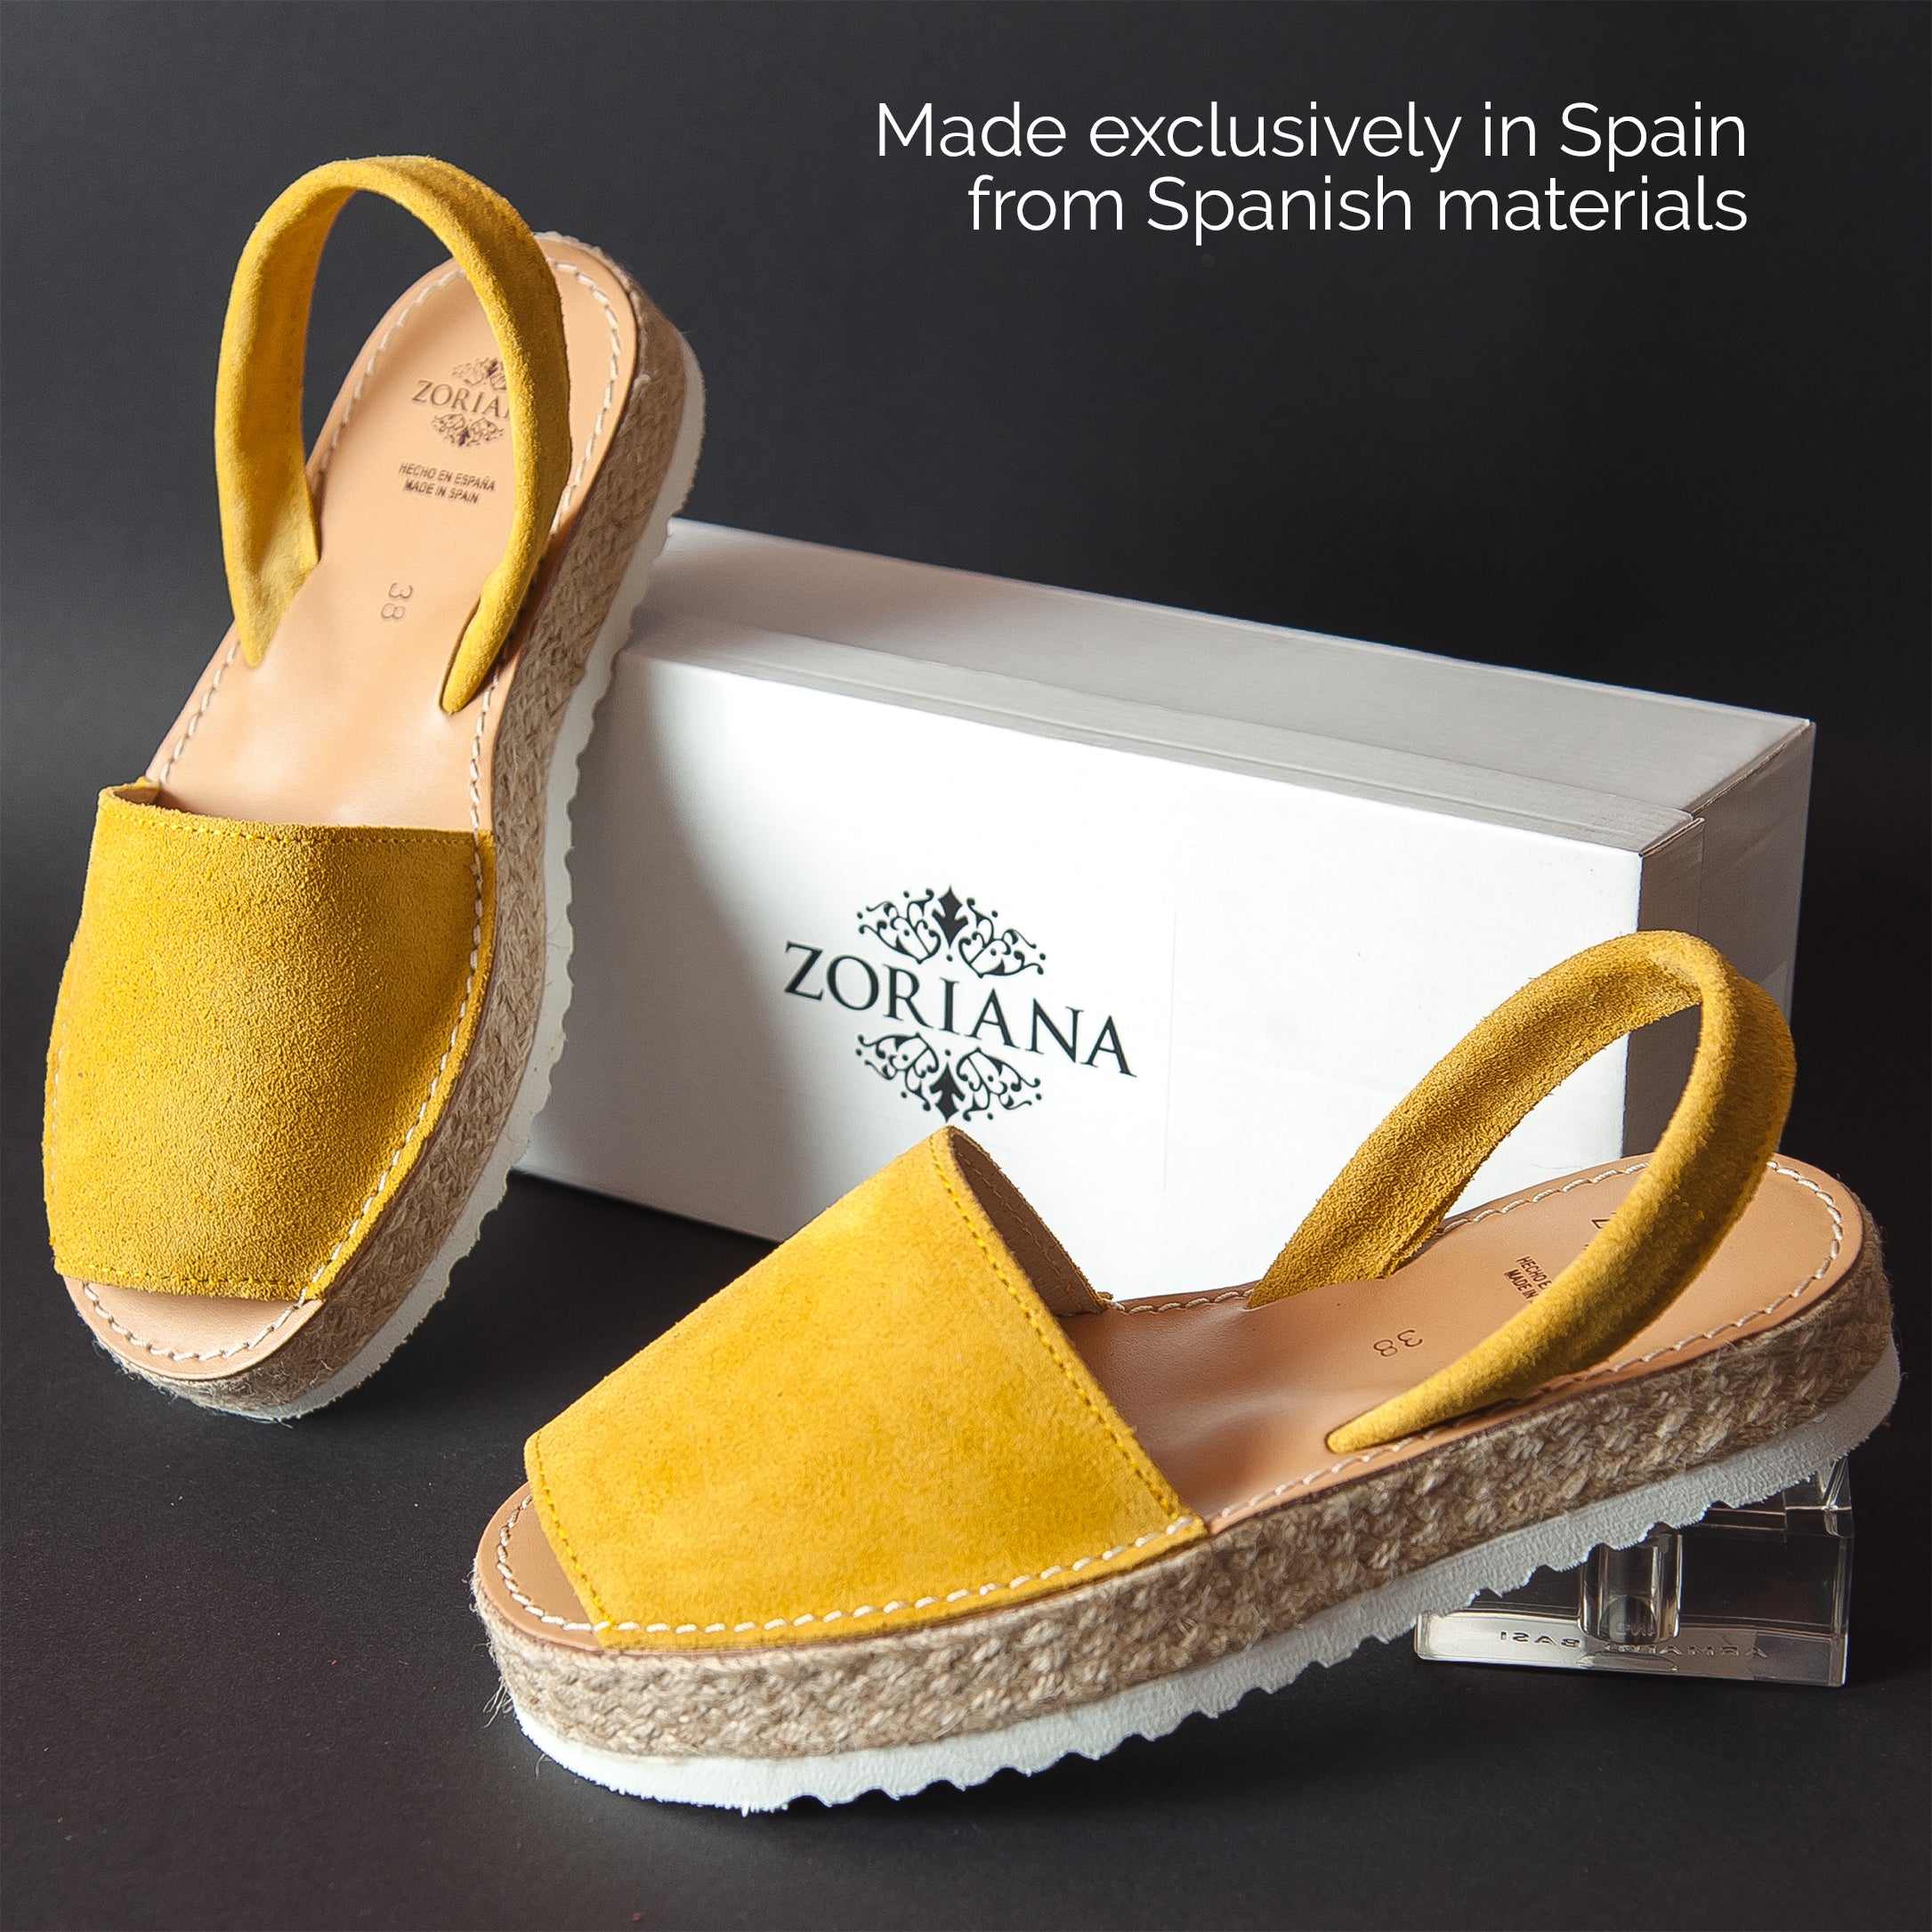 Zoriana Suede Espadrilles Women Shoes - Suede Leather